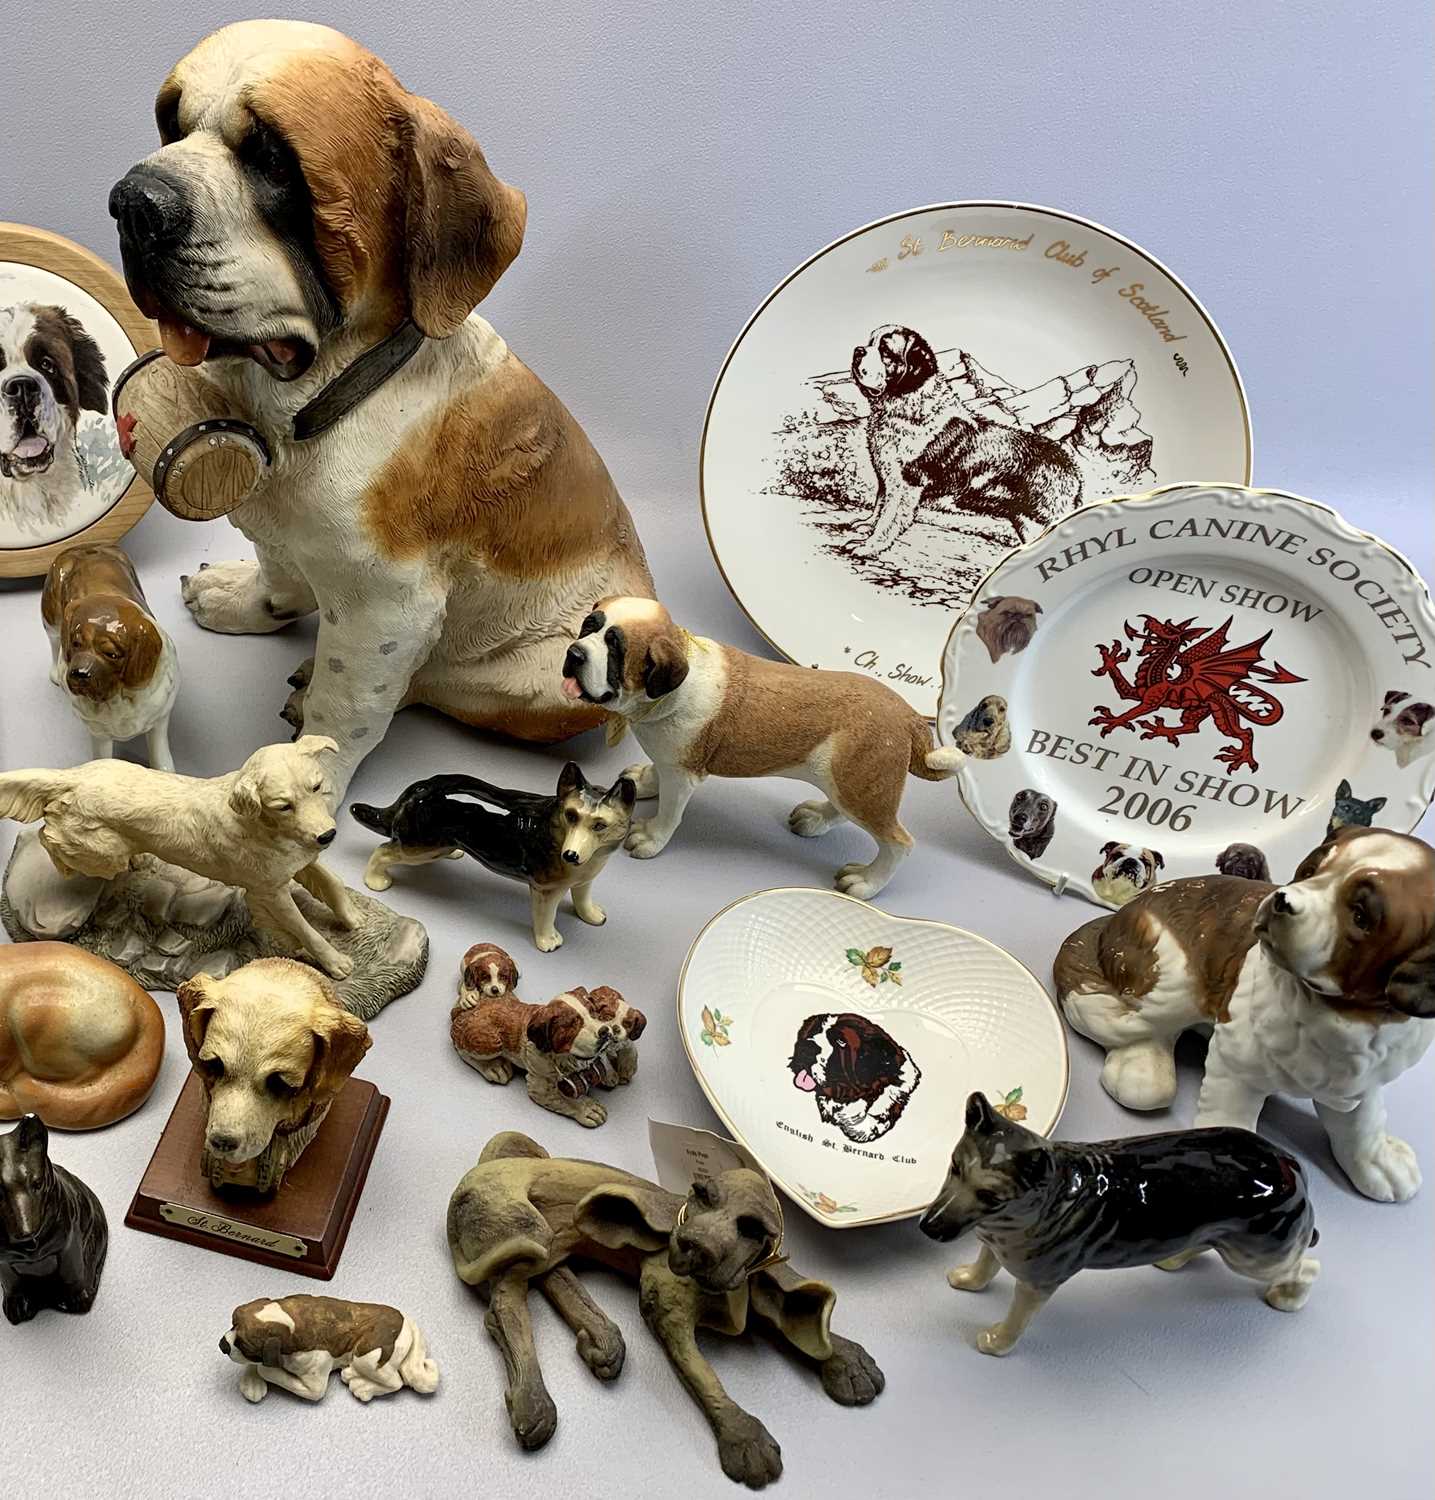 ST BERNARD DOGS collection of ceramic and composite figures, other dog figures, two St Bernard - Image 2 of 3